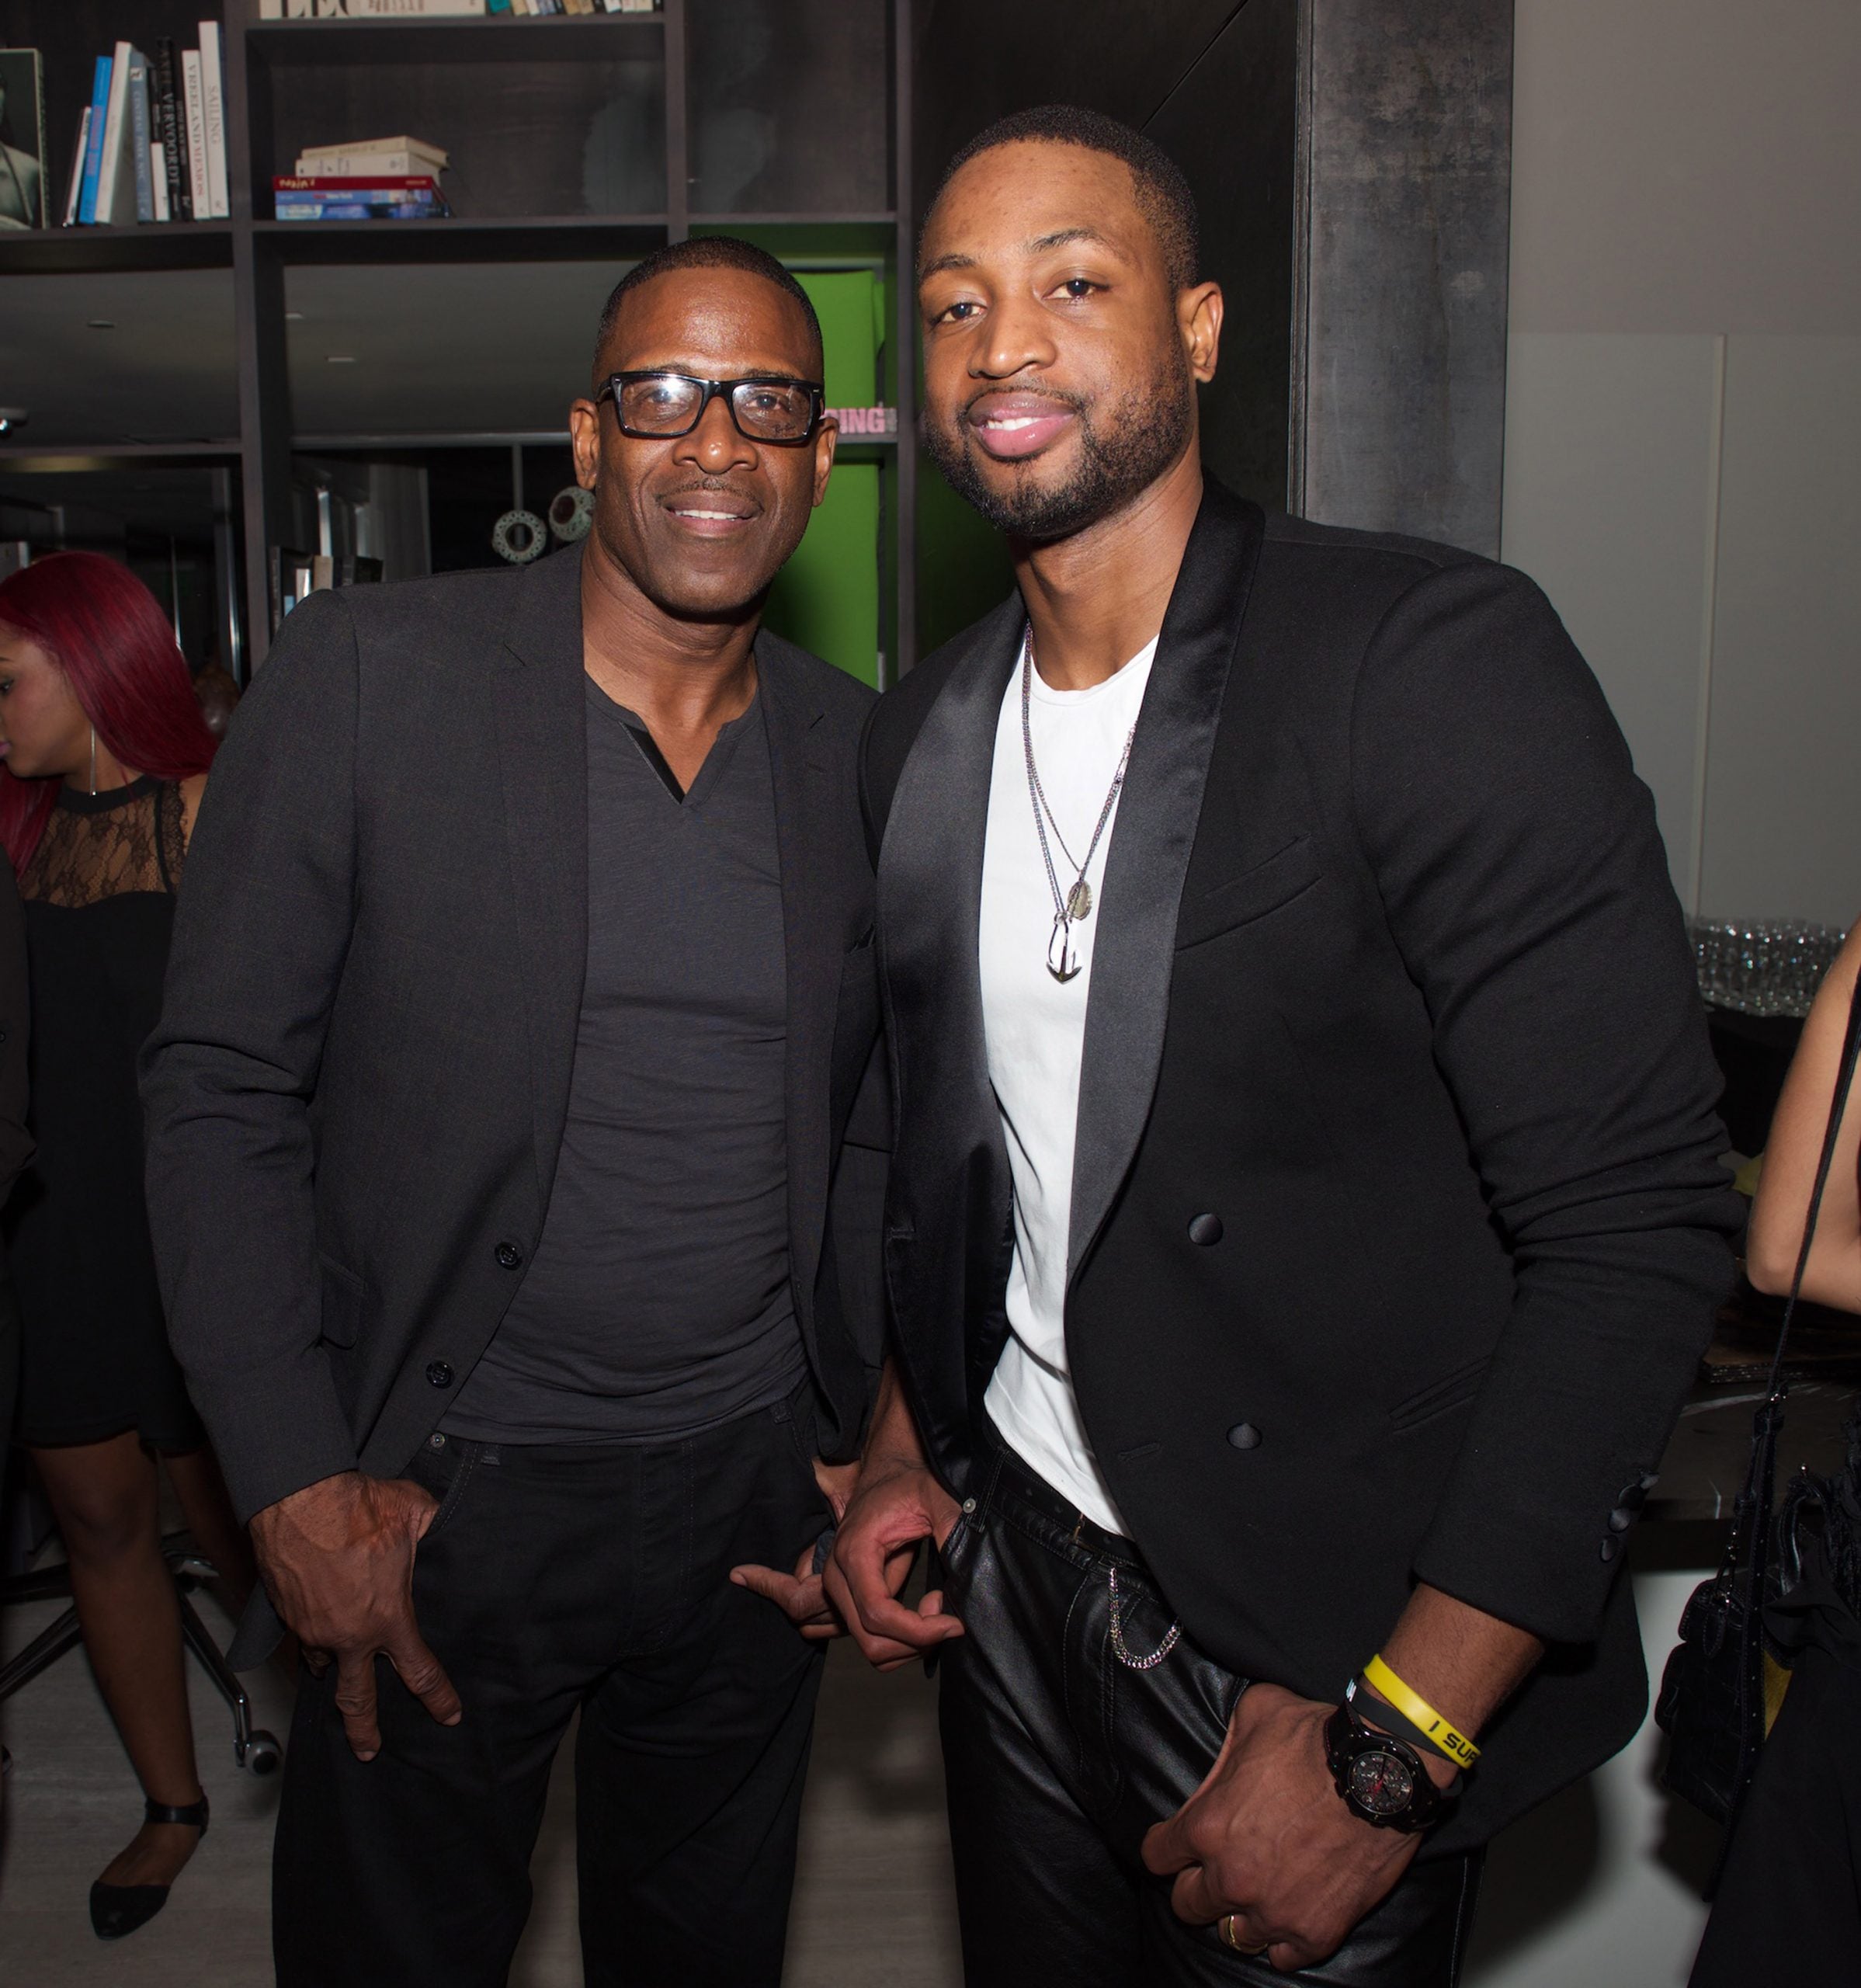 People Can't Believe This Is Dwyane Wade's Dad: 7 Photos Of Father And Son